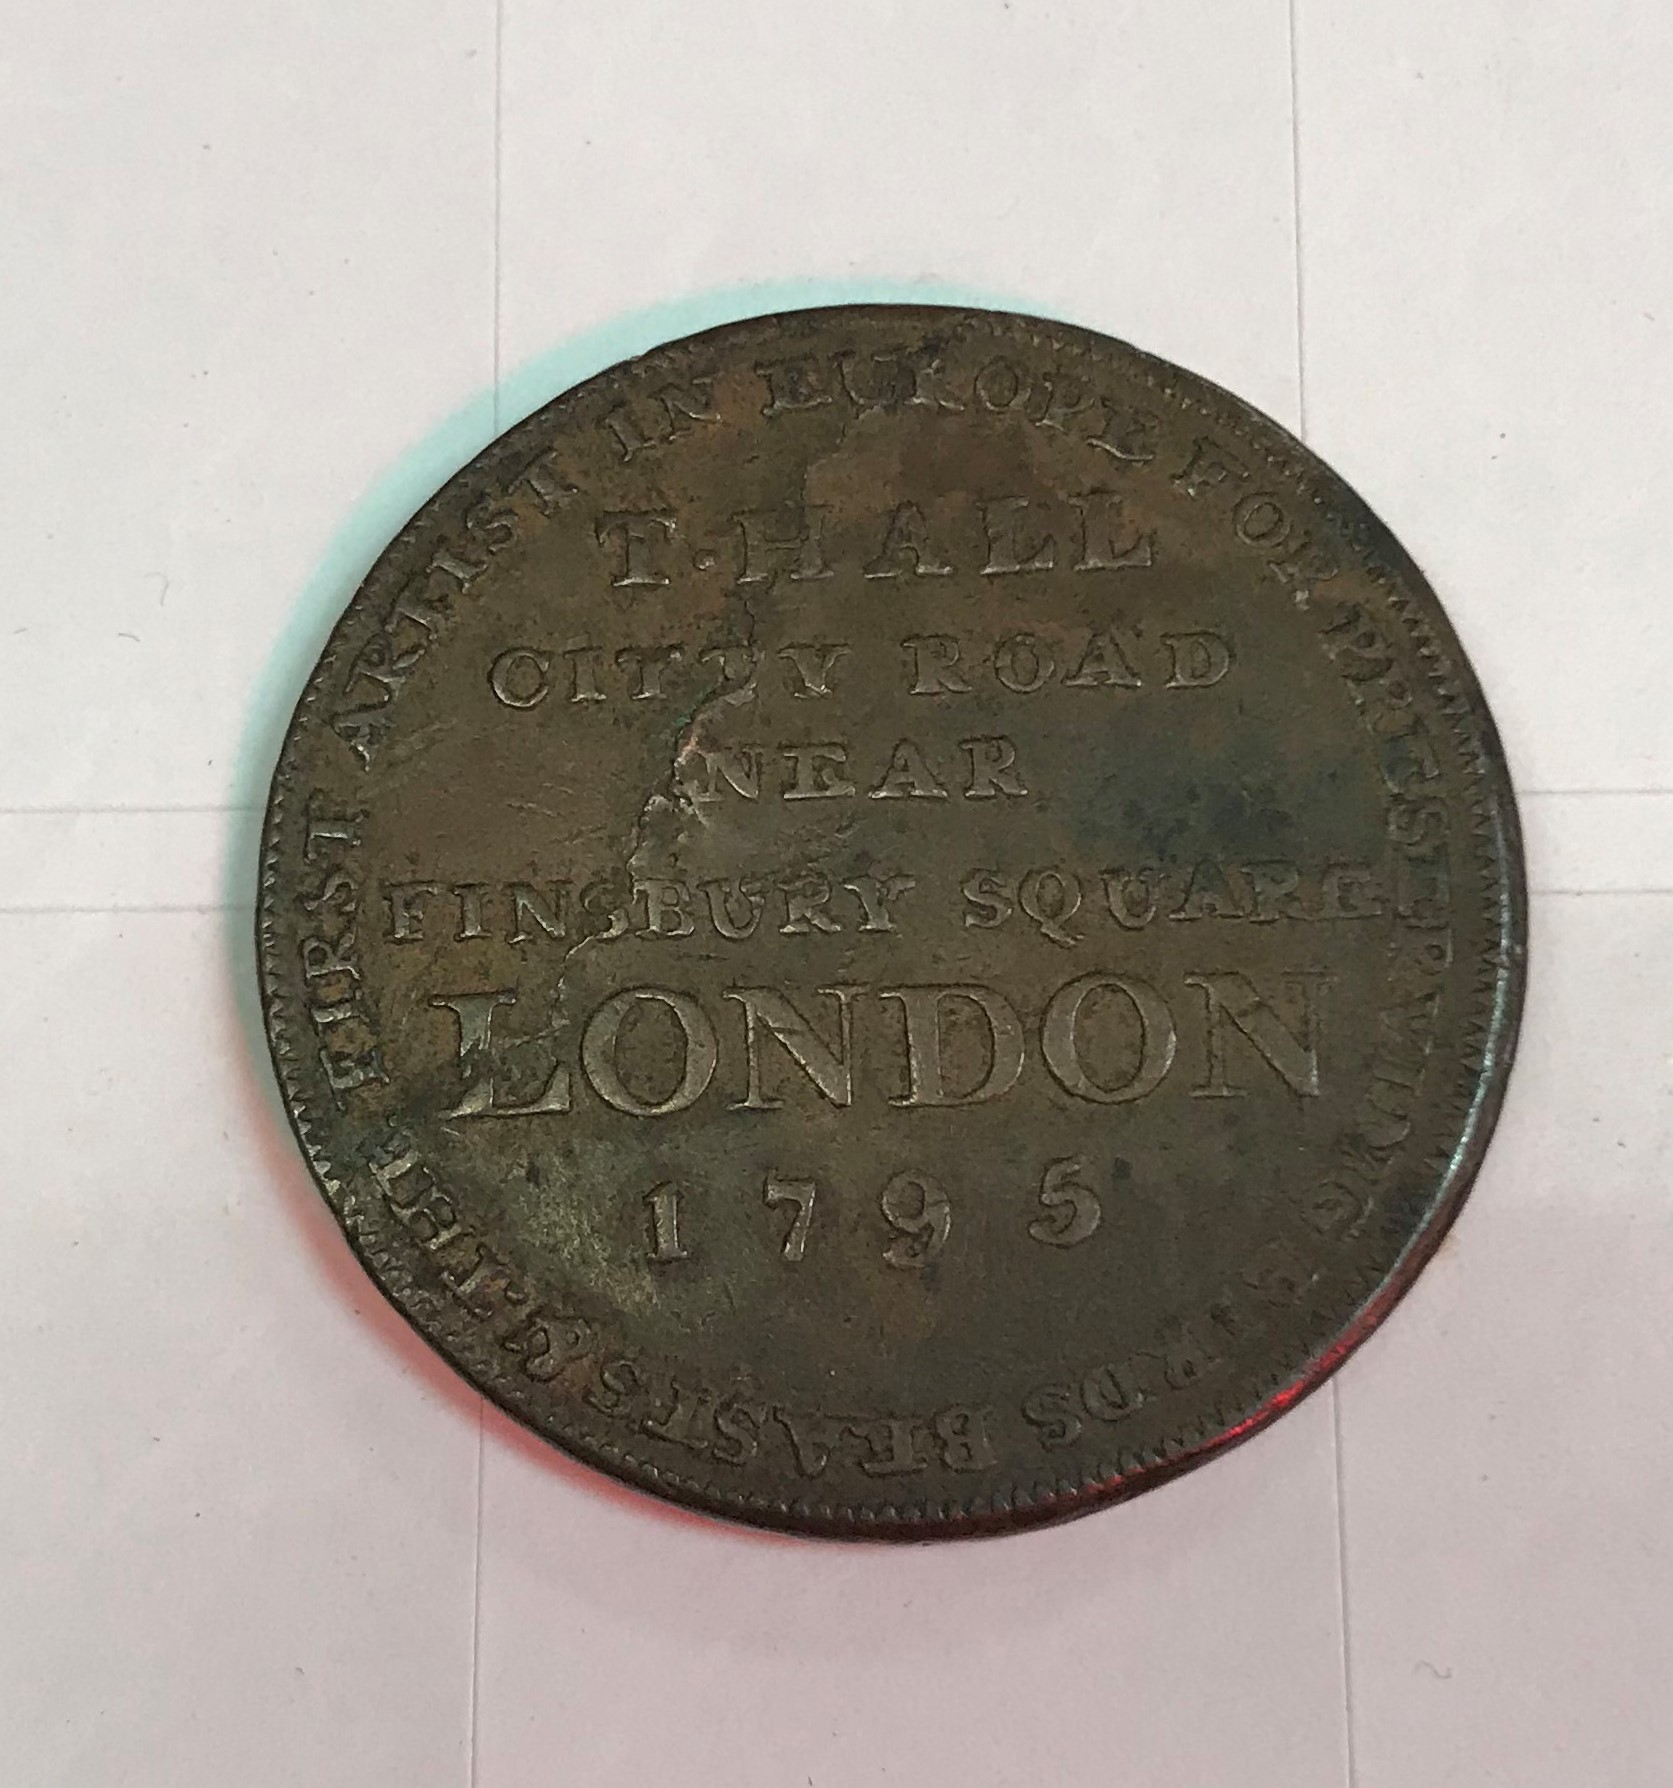 A copper token by William Lutwyche - pen